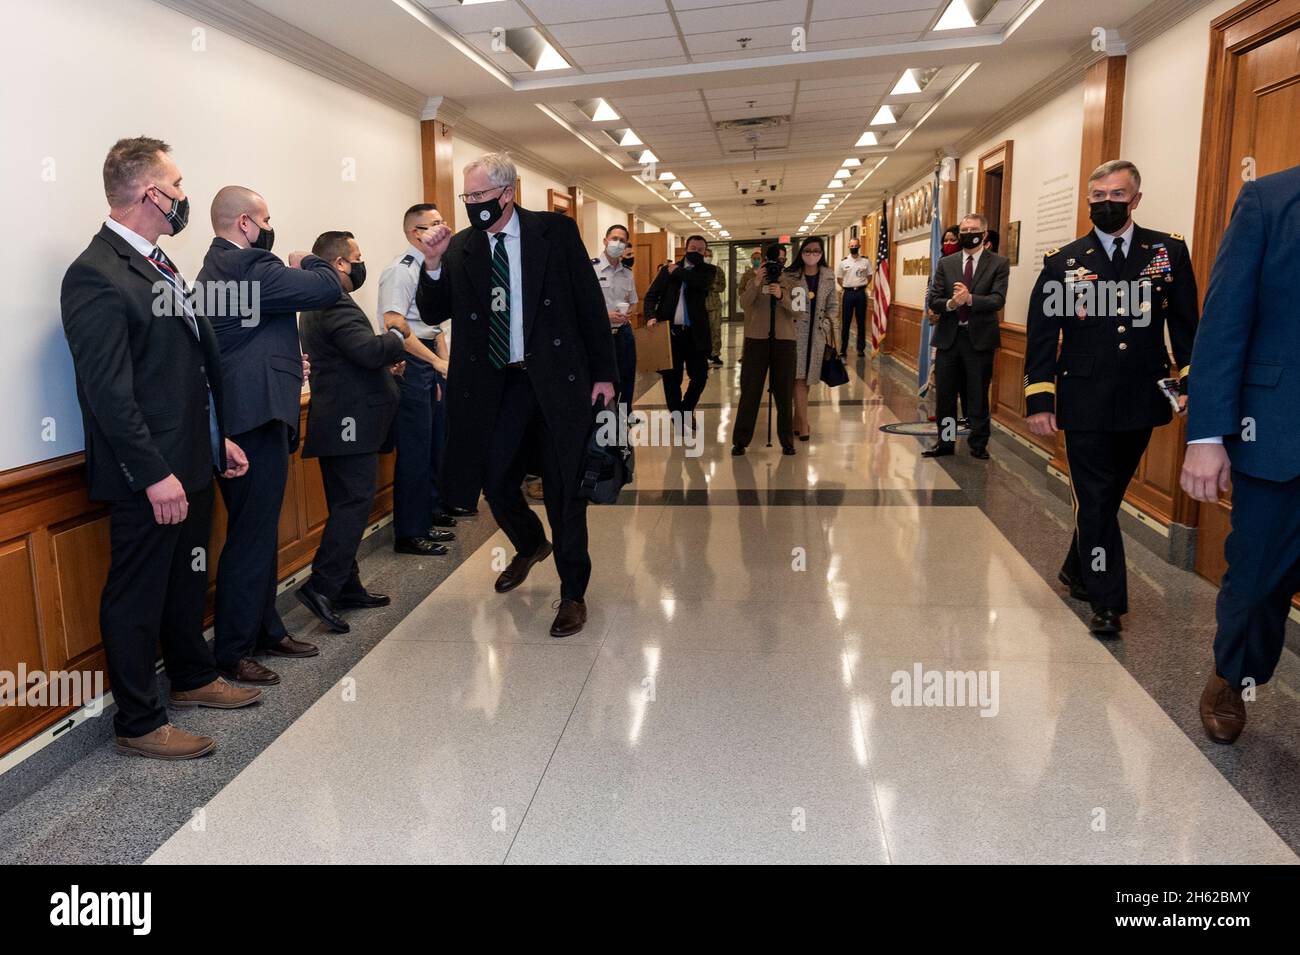 Reportage:  Outgoing Acting Defense Secretary Chris Miller greets staff as he departs the Pentagon during the administration transition, the Pentagon, Washington, D.C., Jan. 20, 2021. Stock Photo